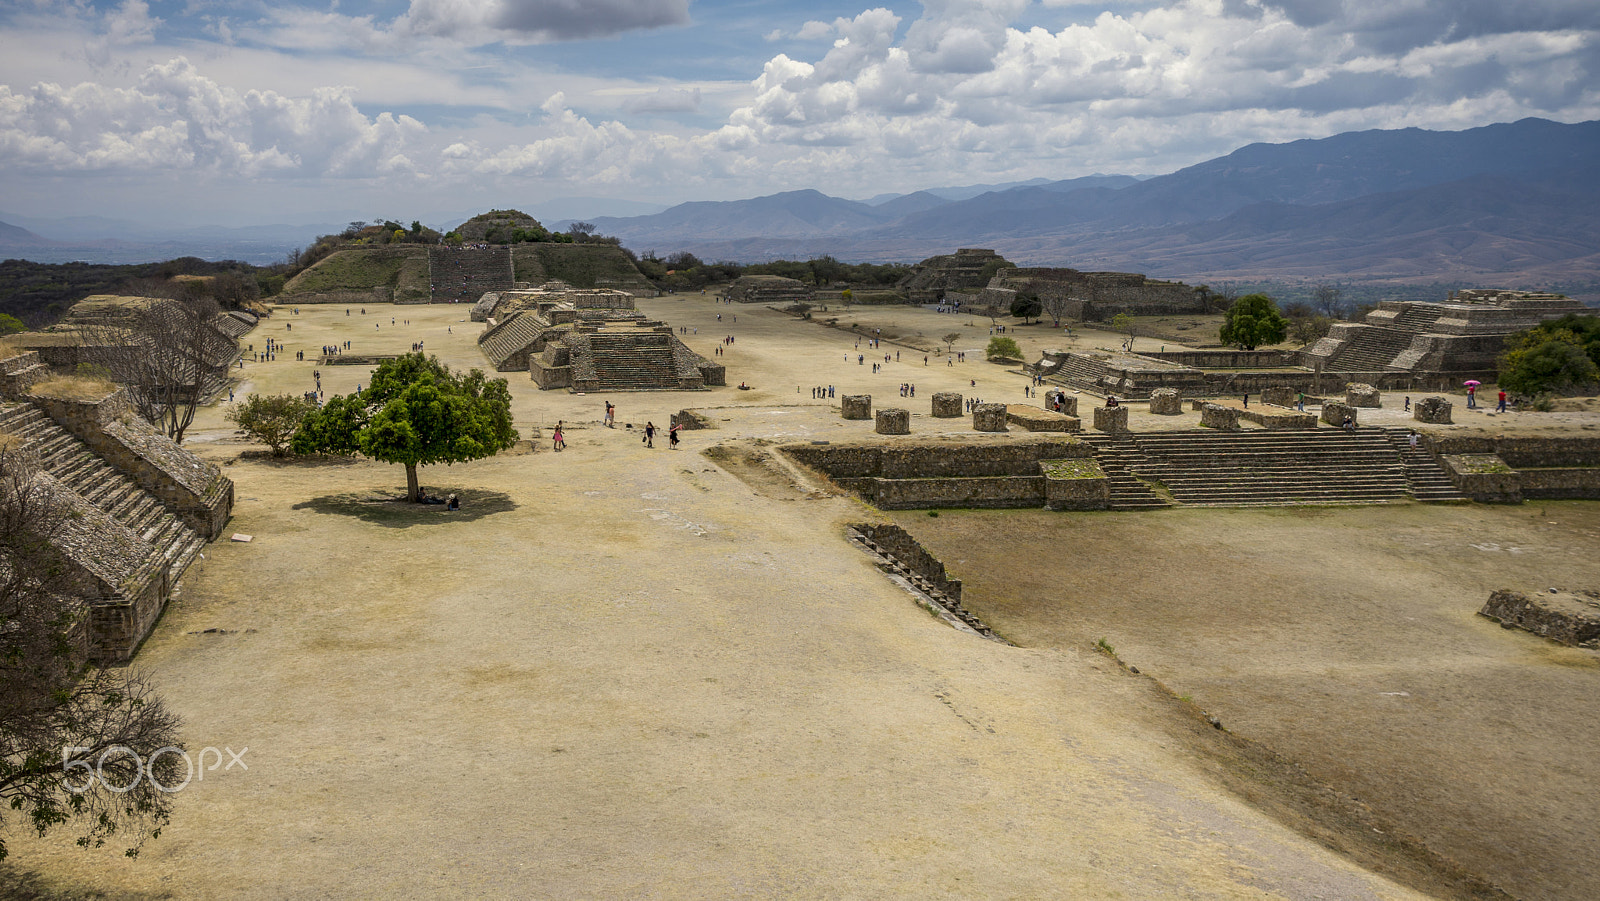 Sony a7 sample photo. Monte alban photography